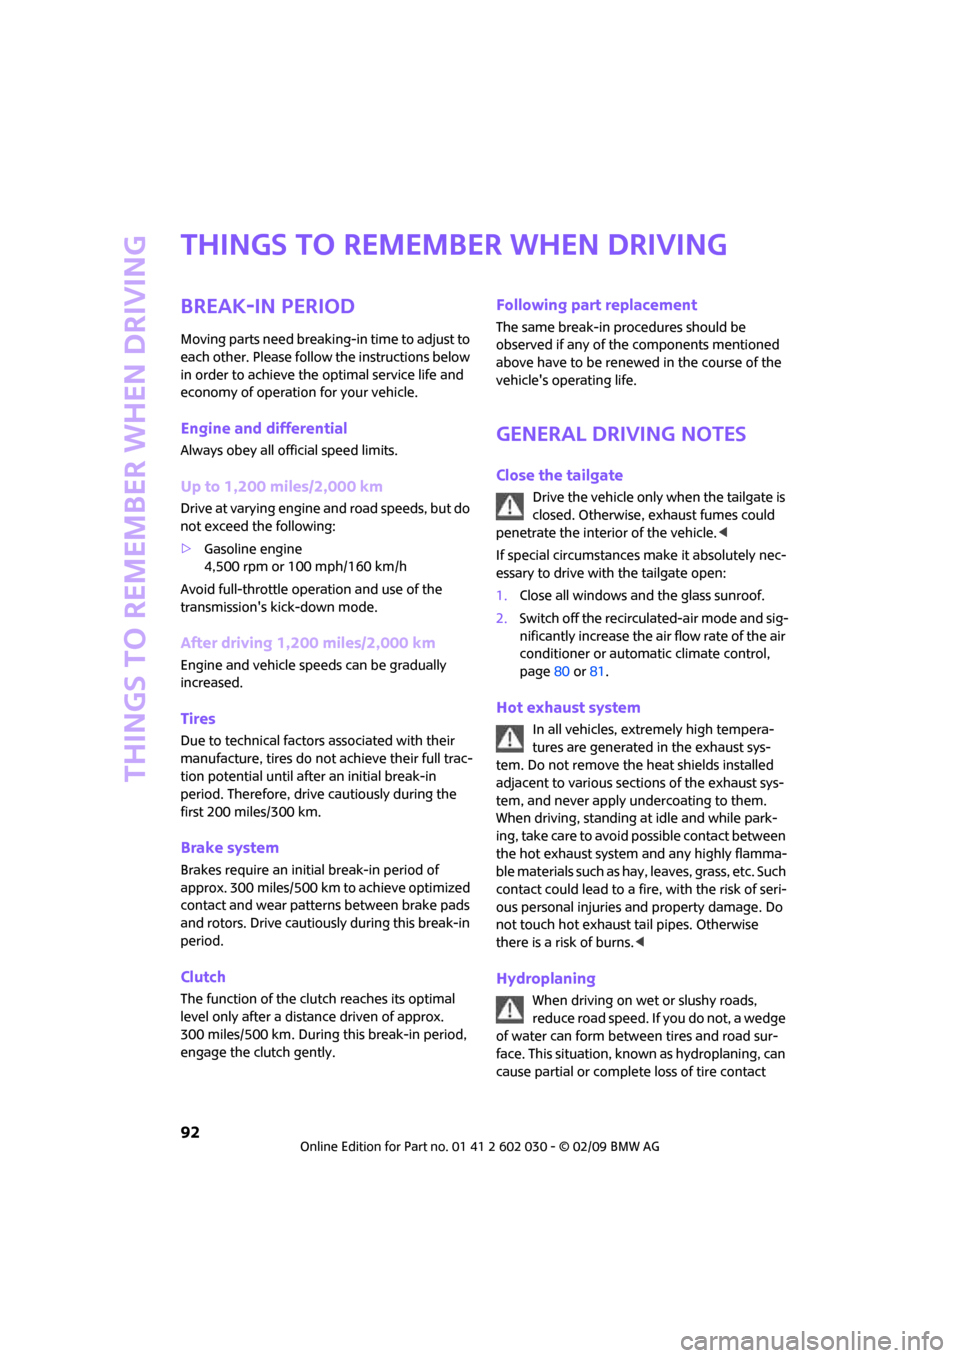 MINI Convertible 2009  Owners Manual Things to remember when driving
92
Things to remember when driving
Break-in period
Moving parts need breaking-in time to adjust to 
each other. Please follow the instructions below 
in order to achiev